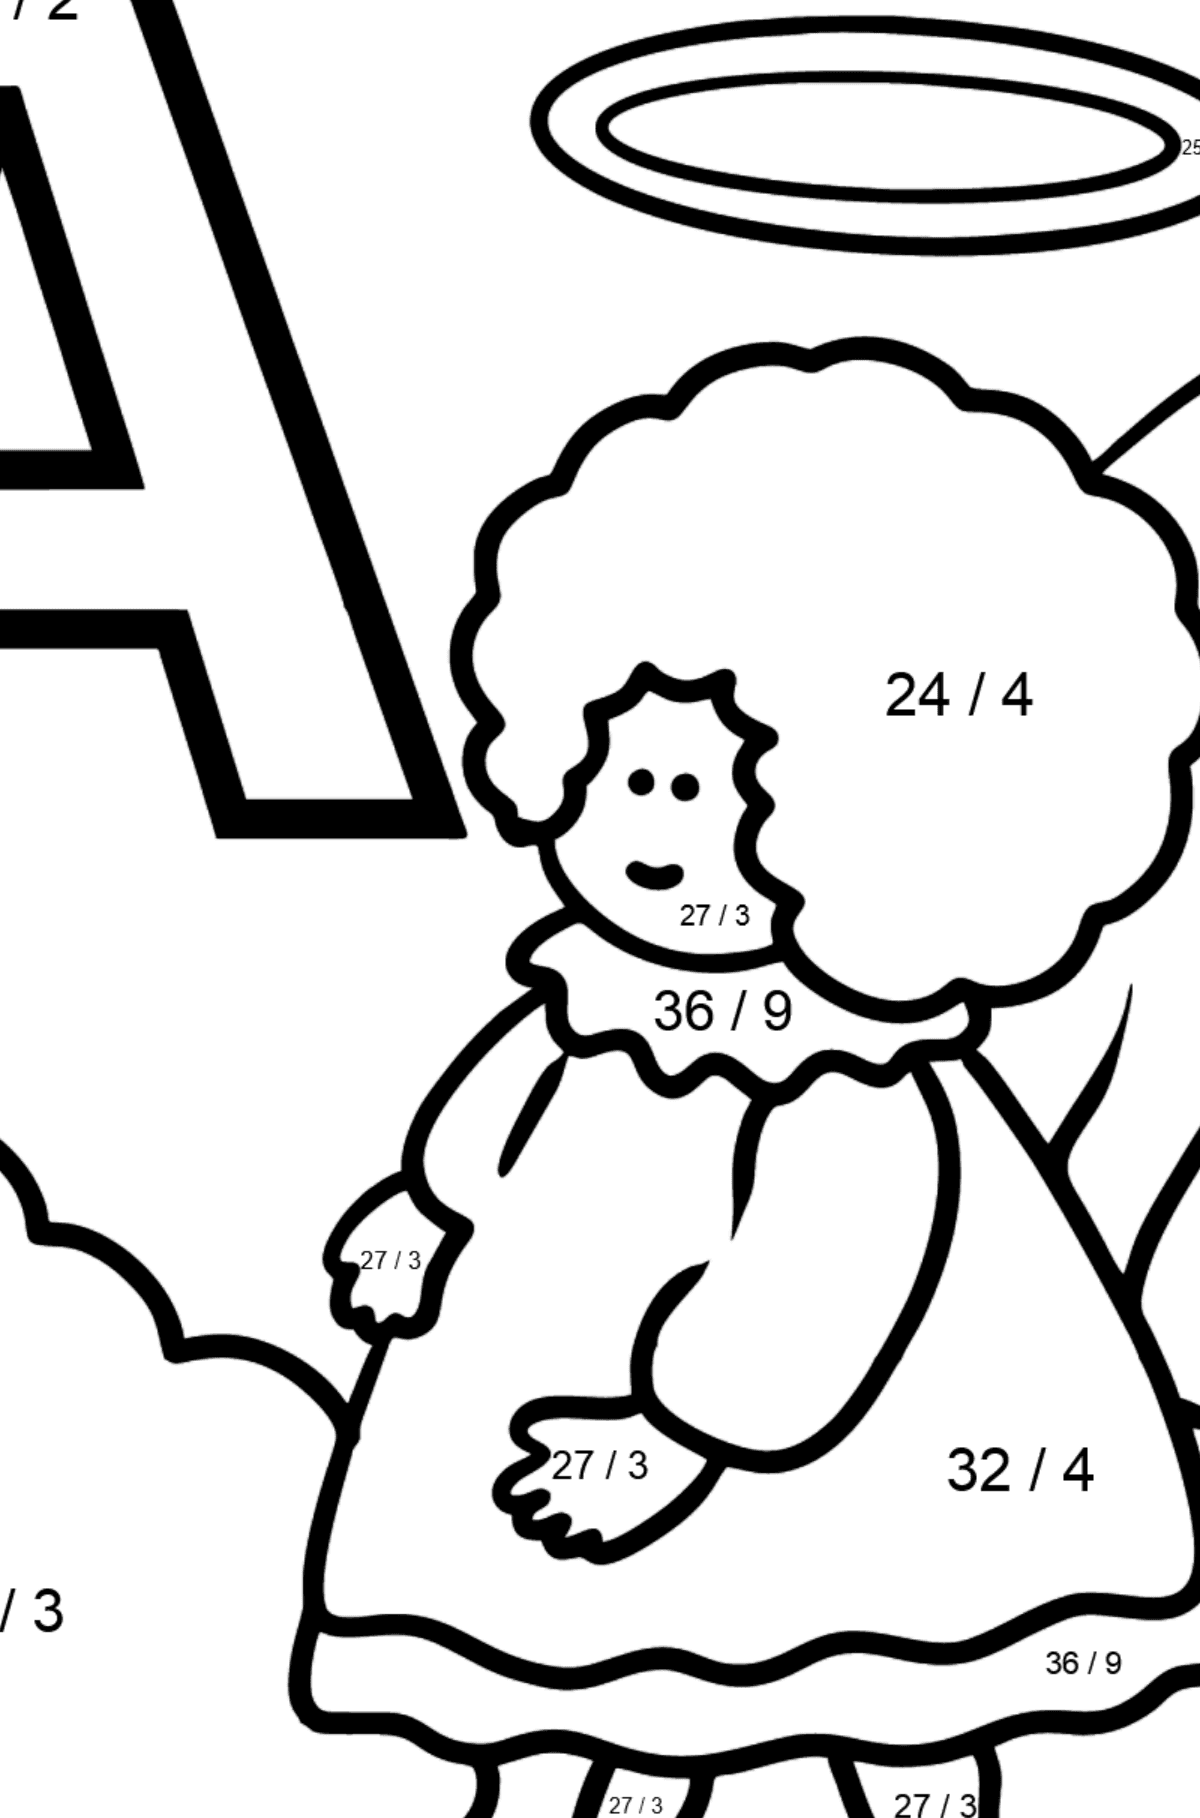 Spanish Letter A coloring pages - ÁNGEL - Math Coloring - Division for Kids